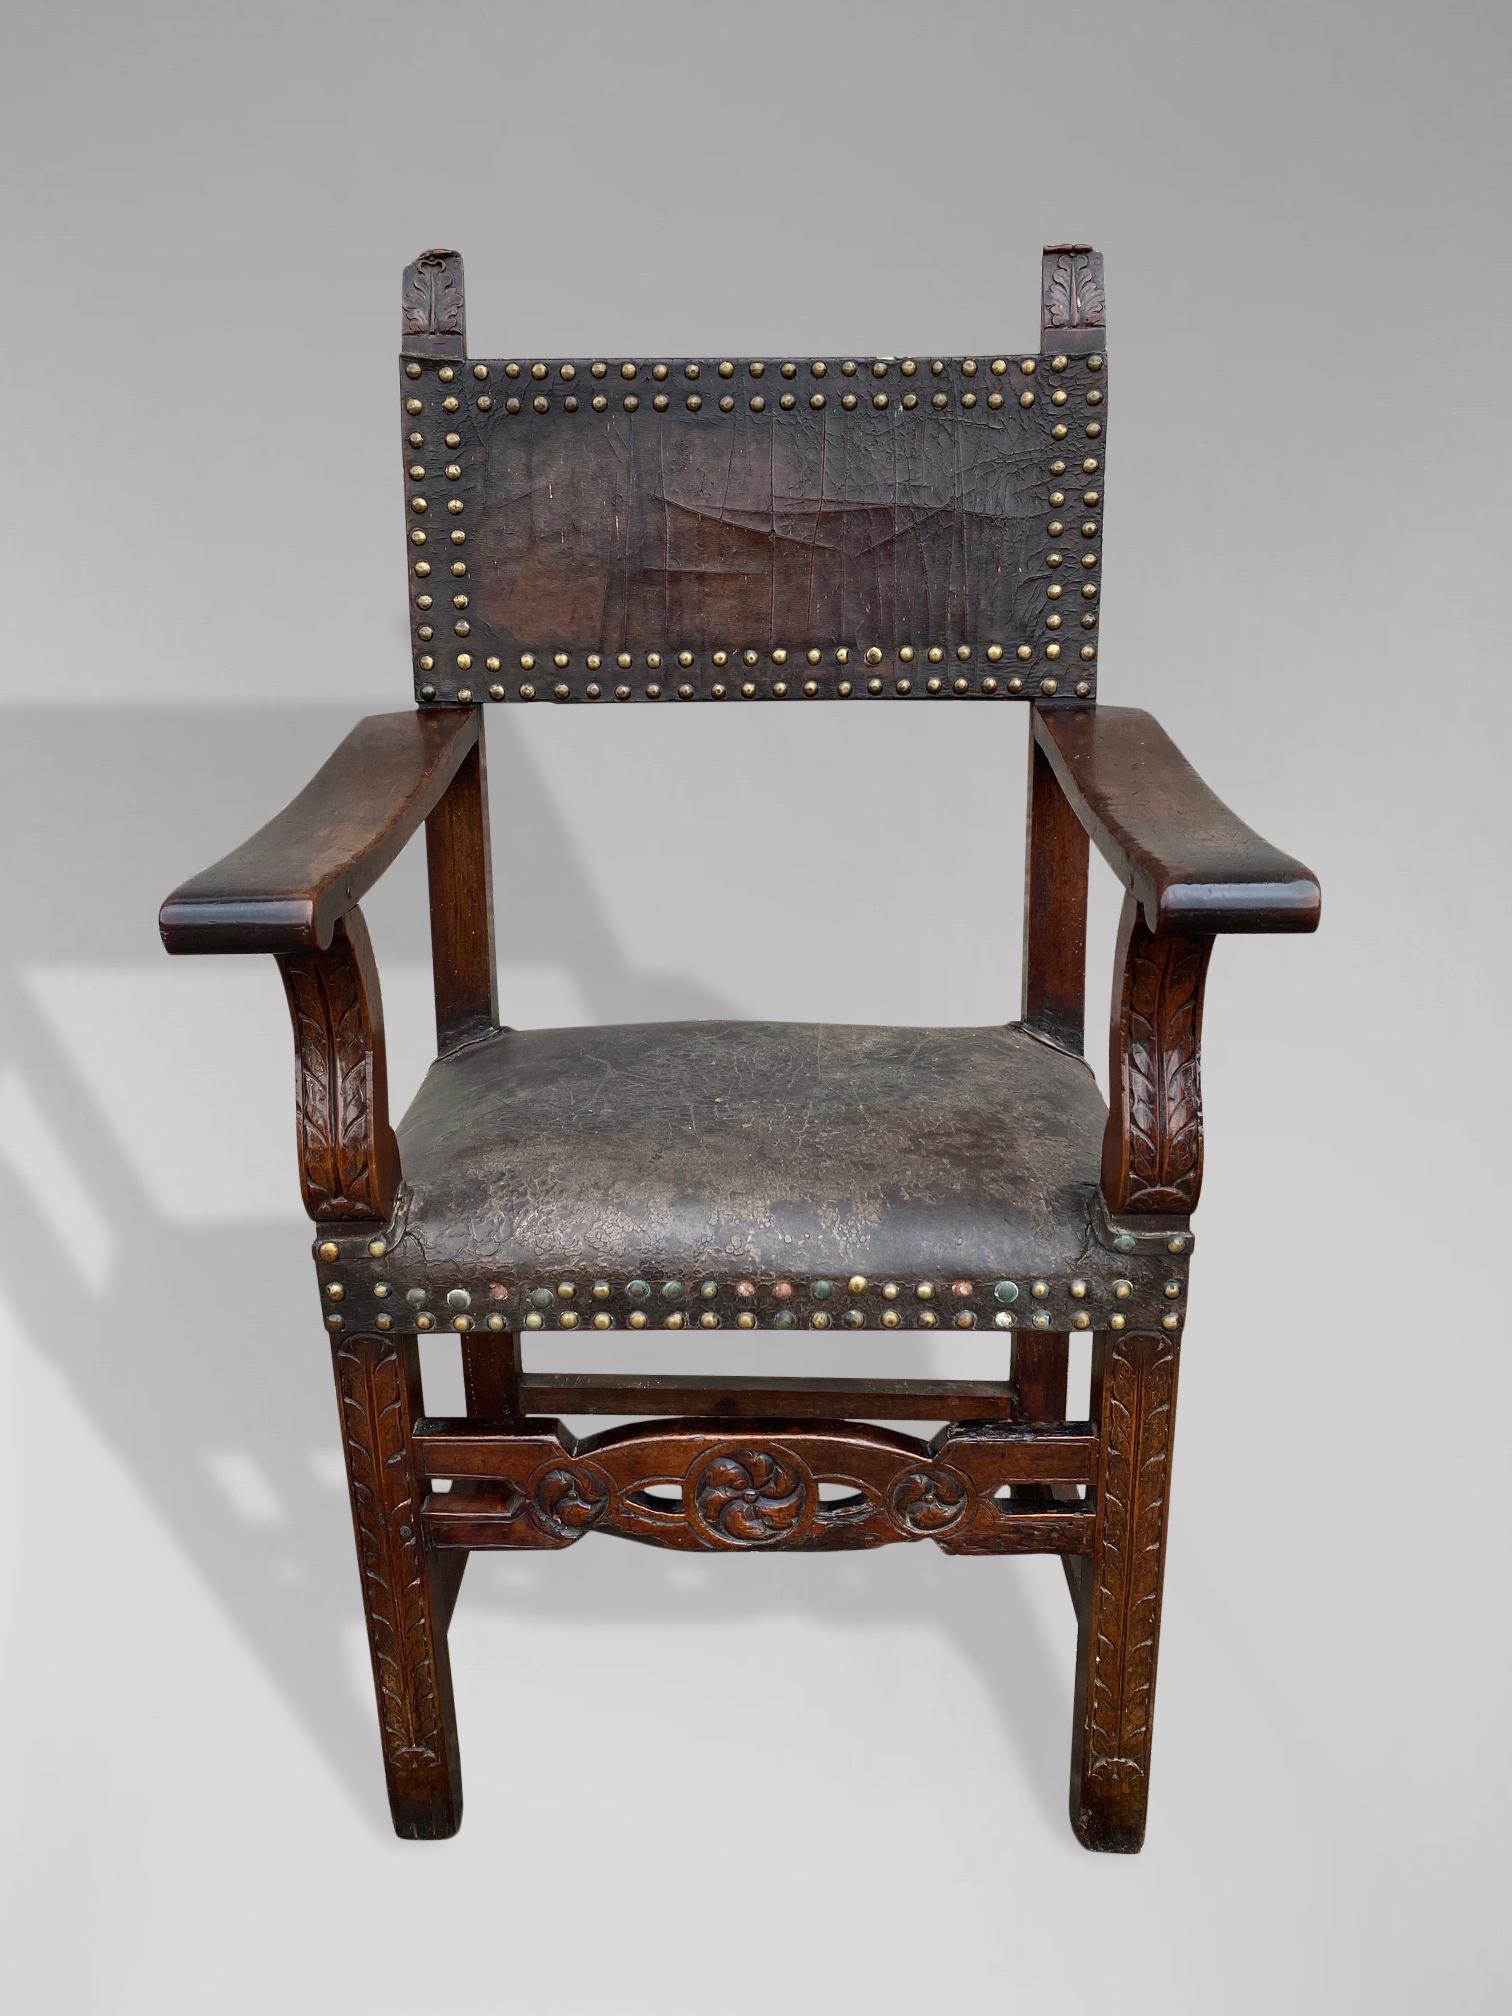 A lovely late 17th century Spanish walnut and leather armchair, retaining its original leather seat and back, held by worn gilt brass studs. The back of the chair has two finely carved scroll acanthus finials above two broad arms, which are